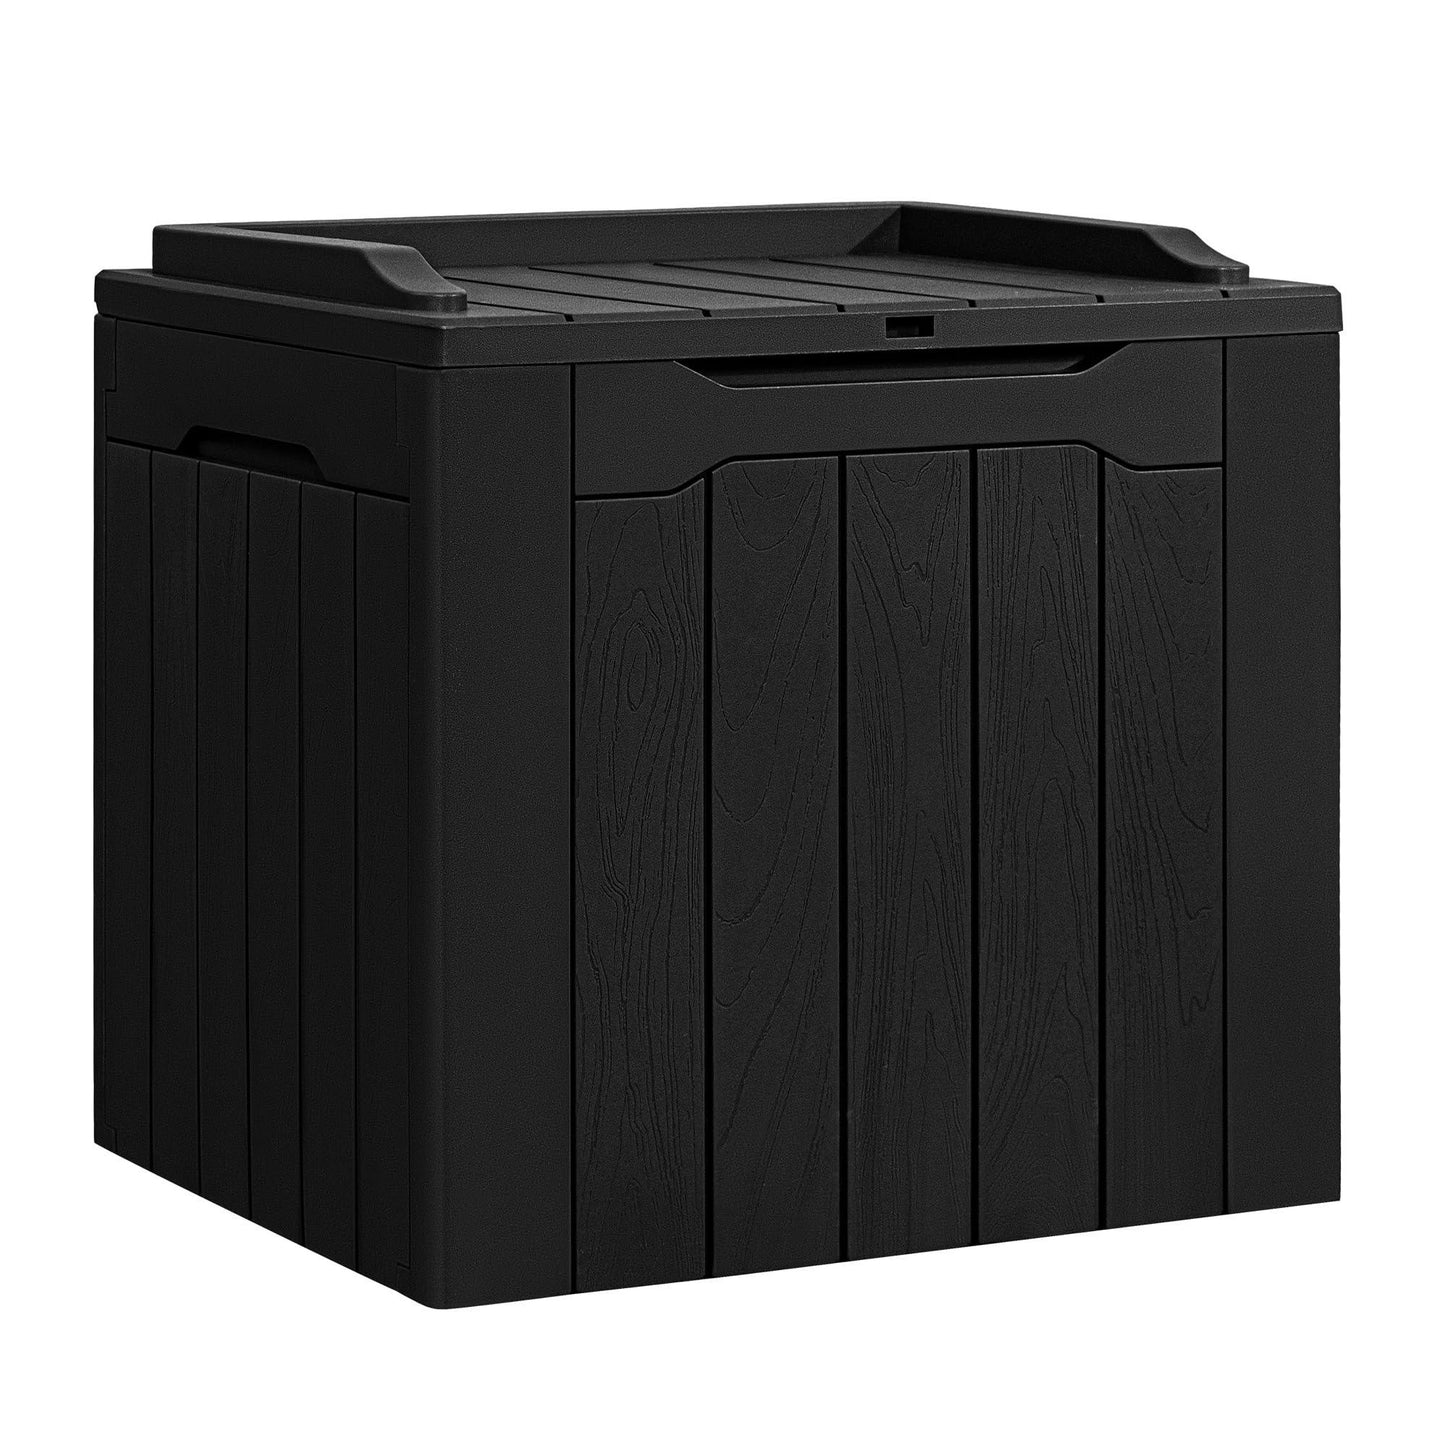 Flamaker Deck Box 31 Gallon Waterproof Resin Storage Box with Lid Indoor Outdoor Storage Bin for Patio Cushions, Toys, Pool Accessories (Black) - CookCave